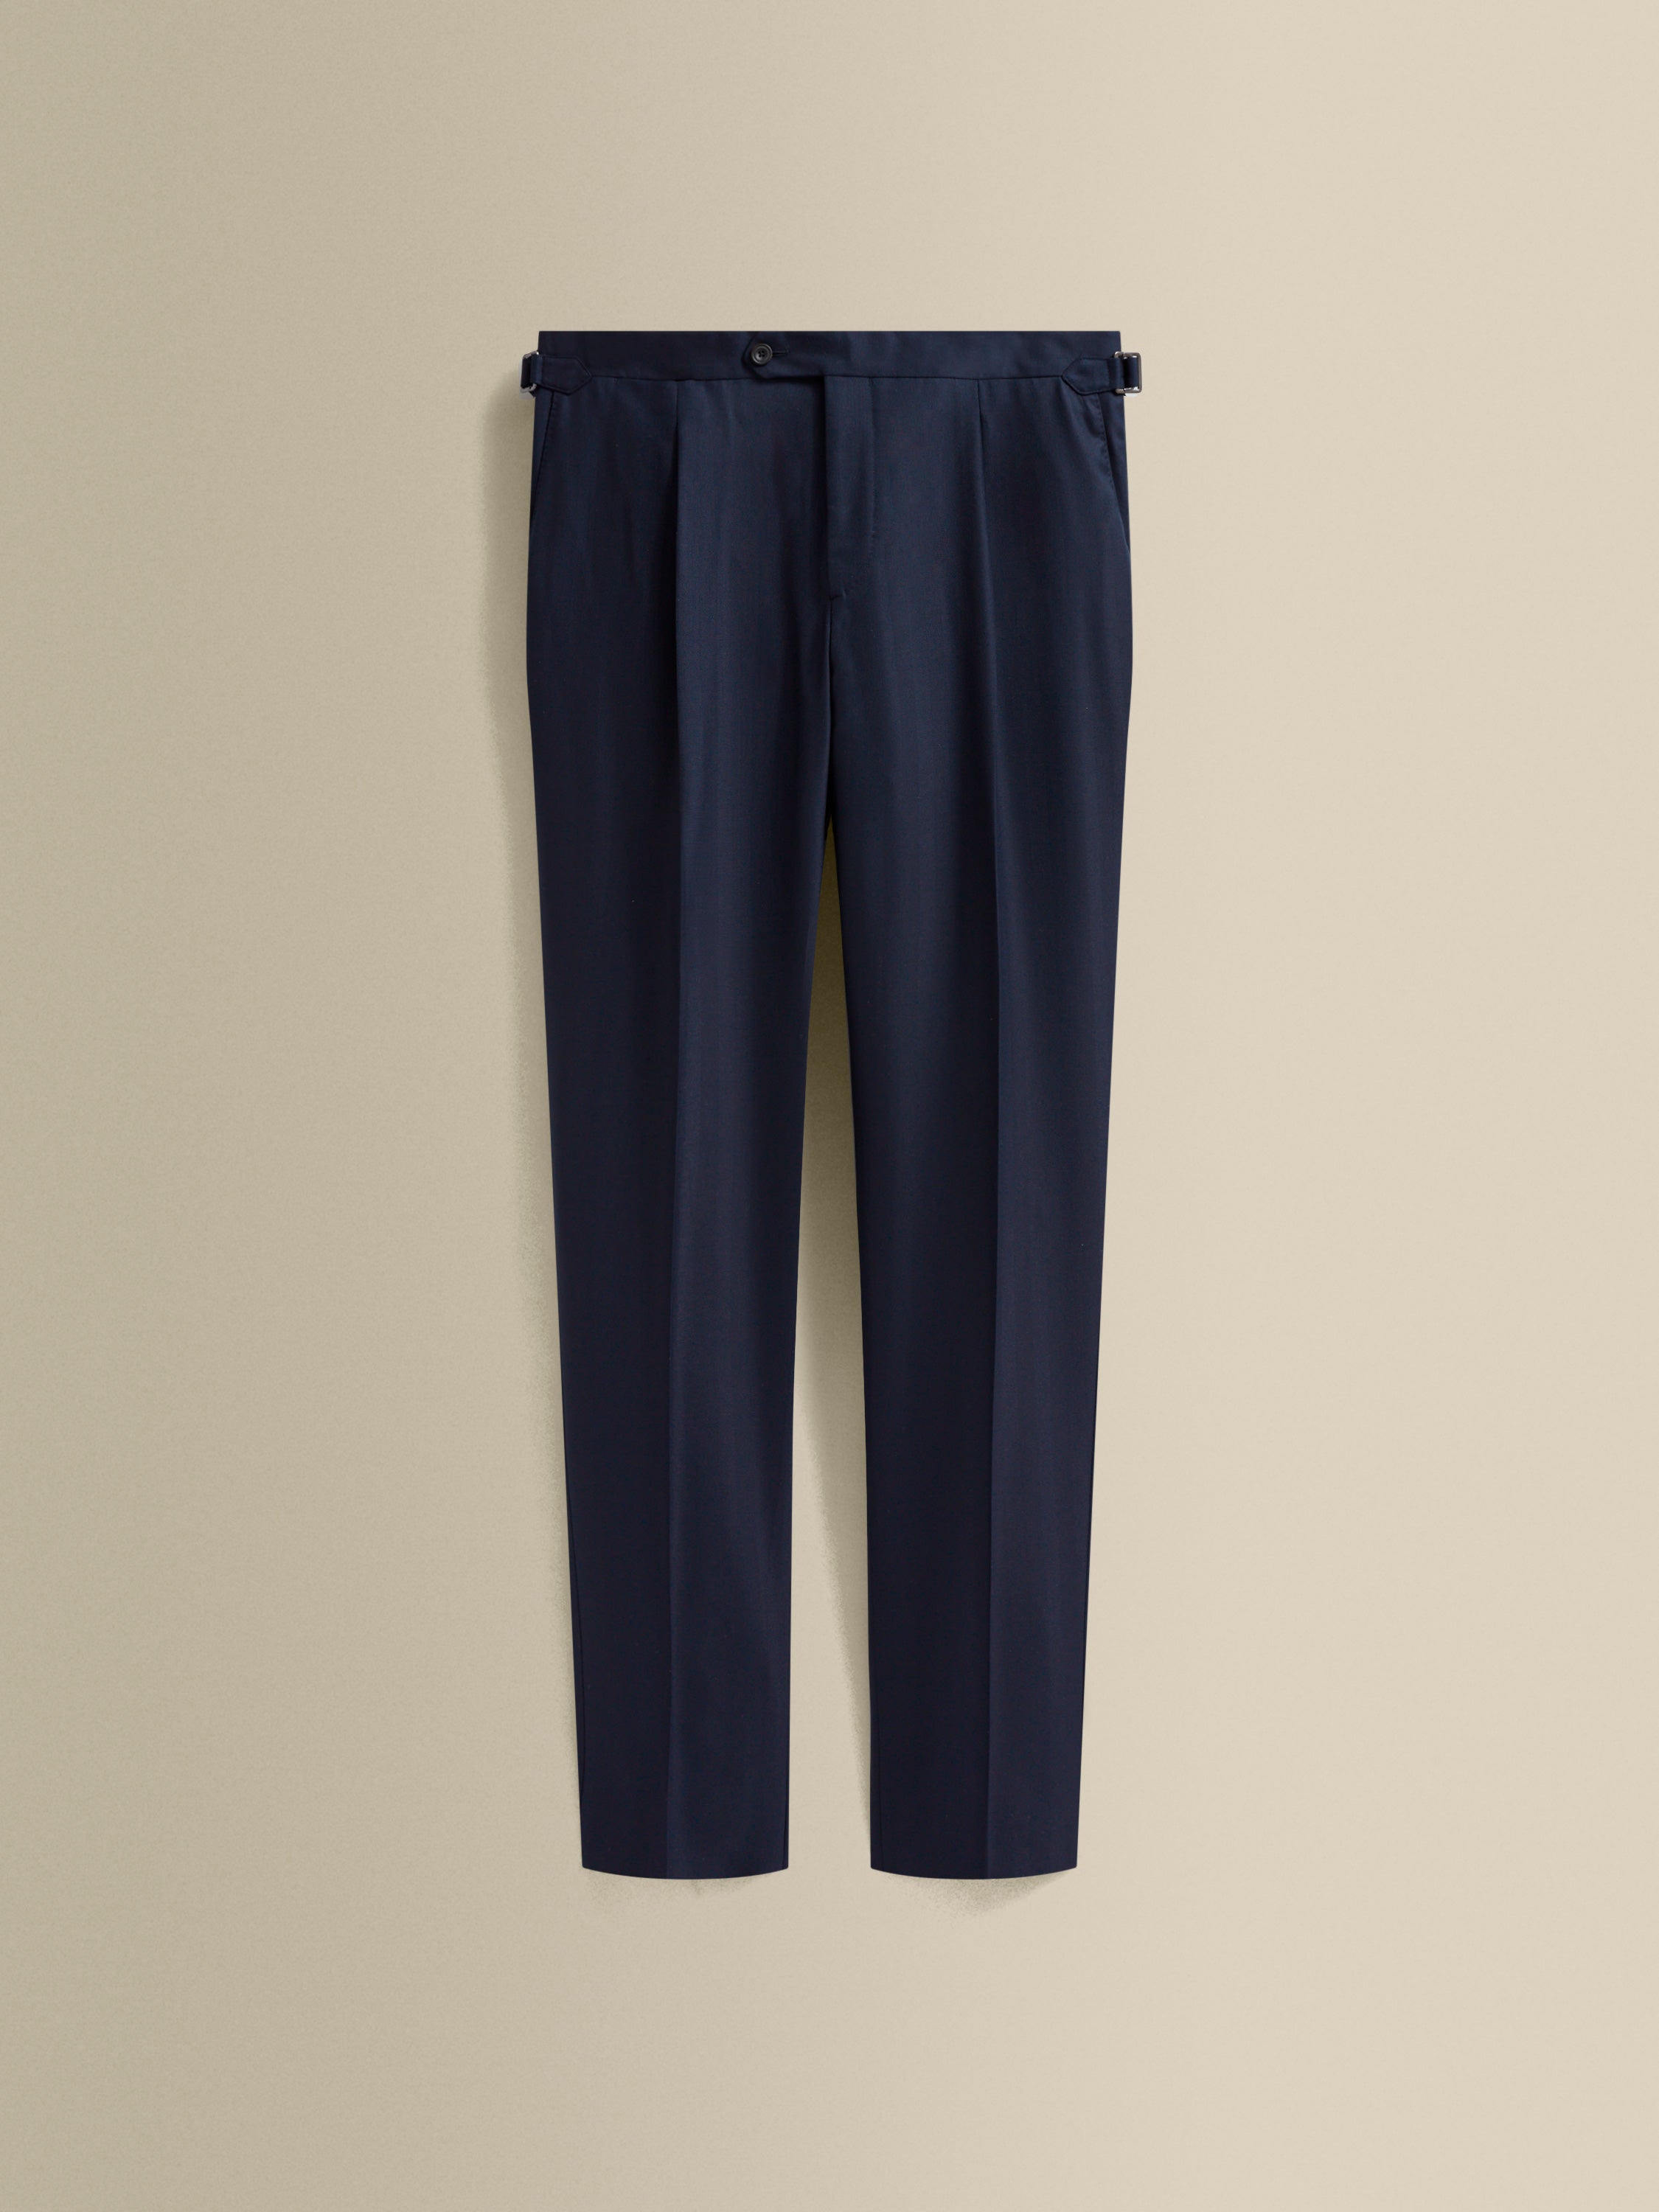 Wool Single Pleat Tailored Trousers Navy Product Image